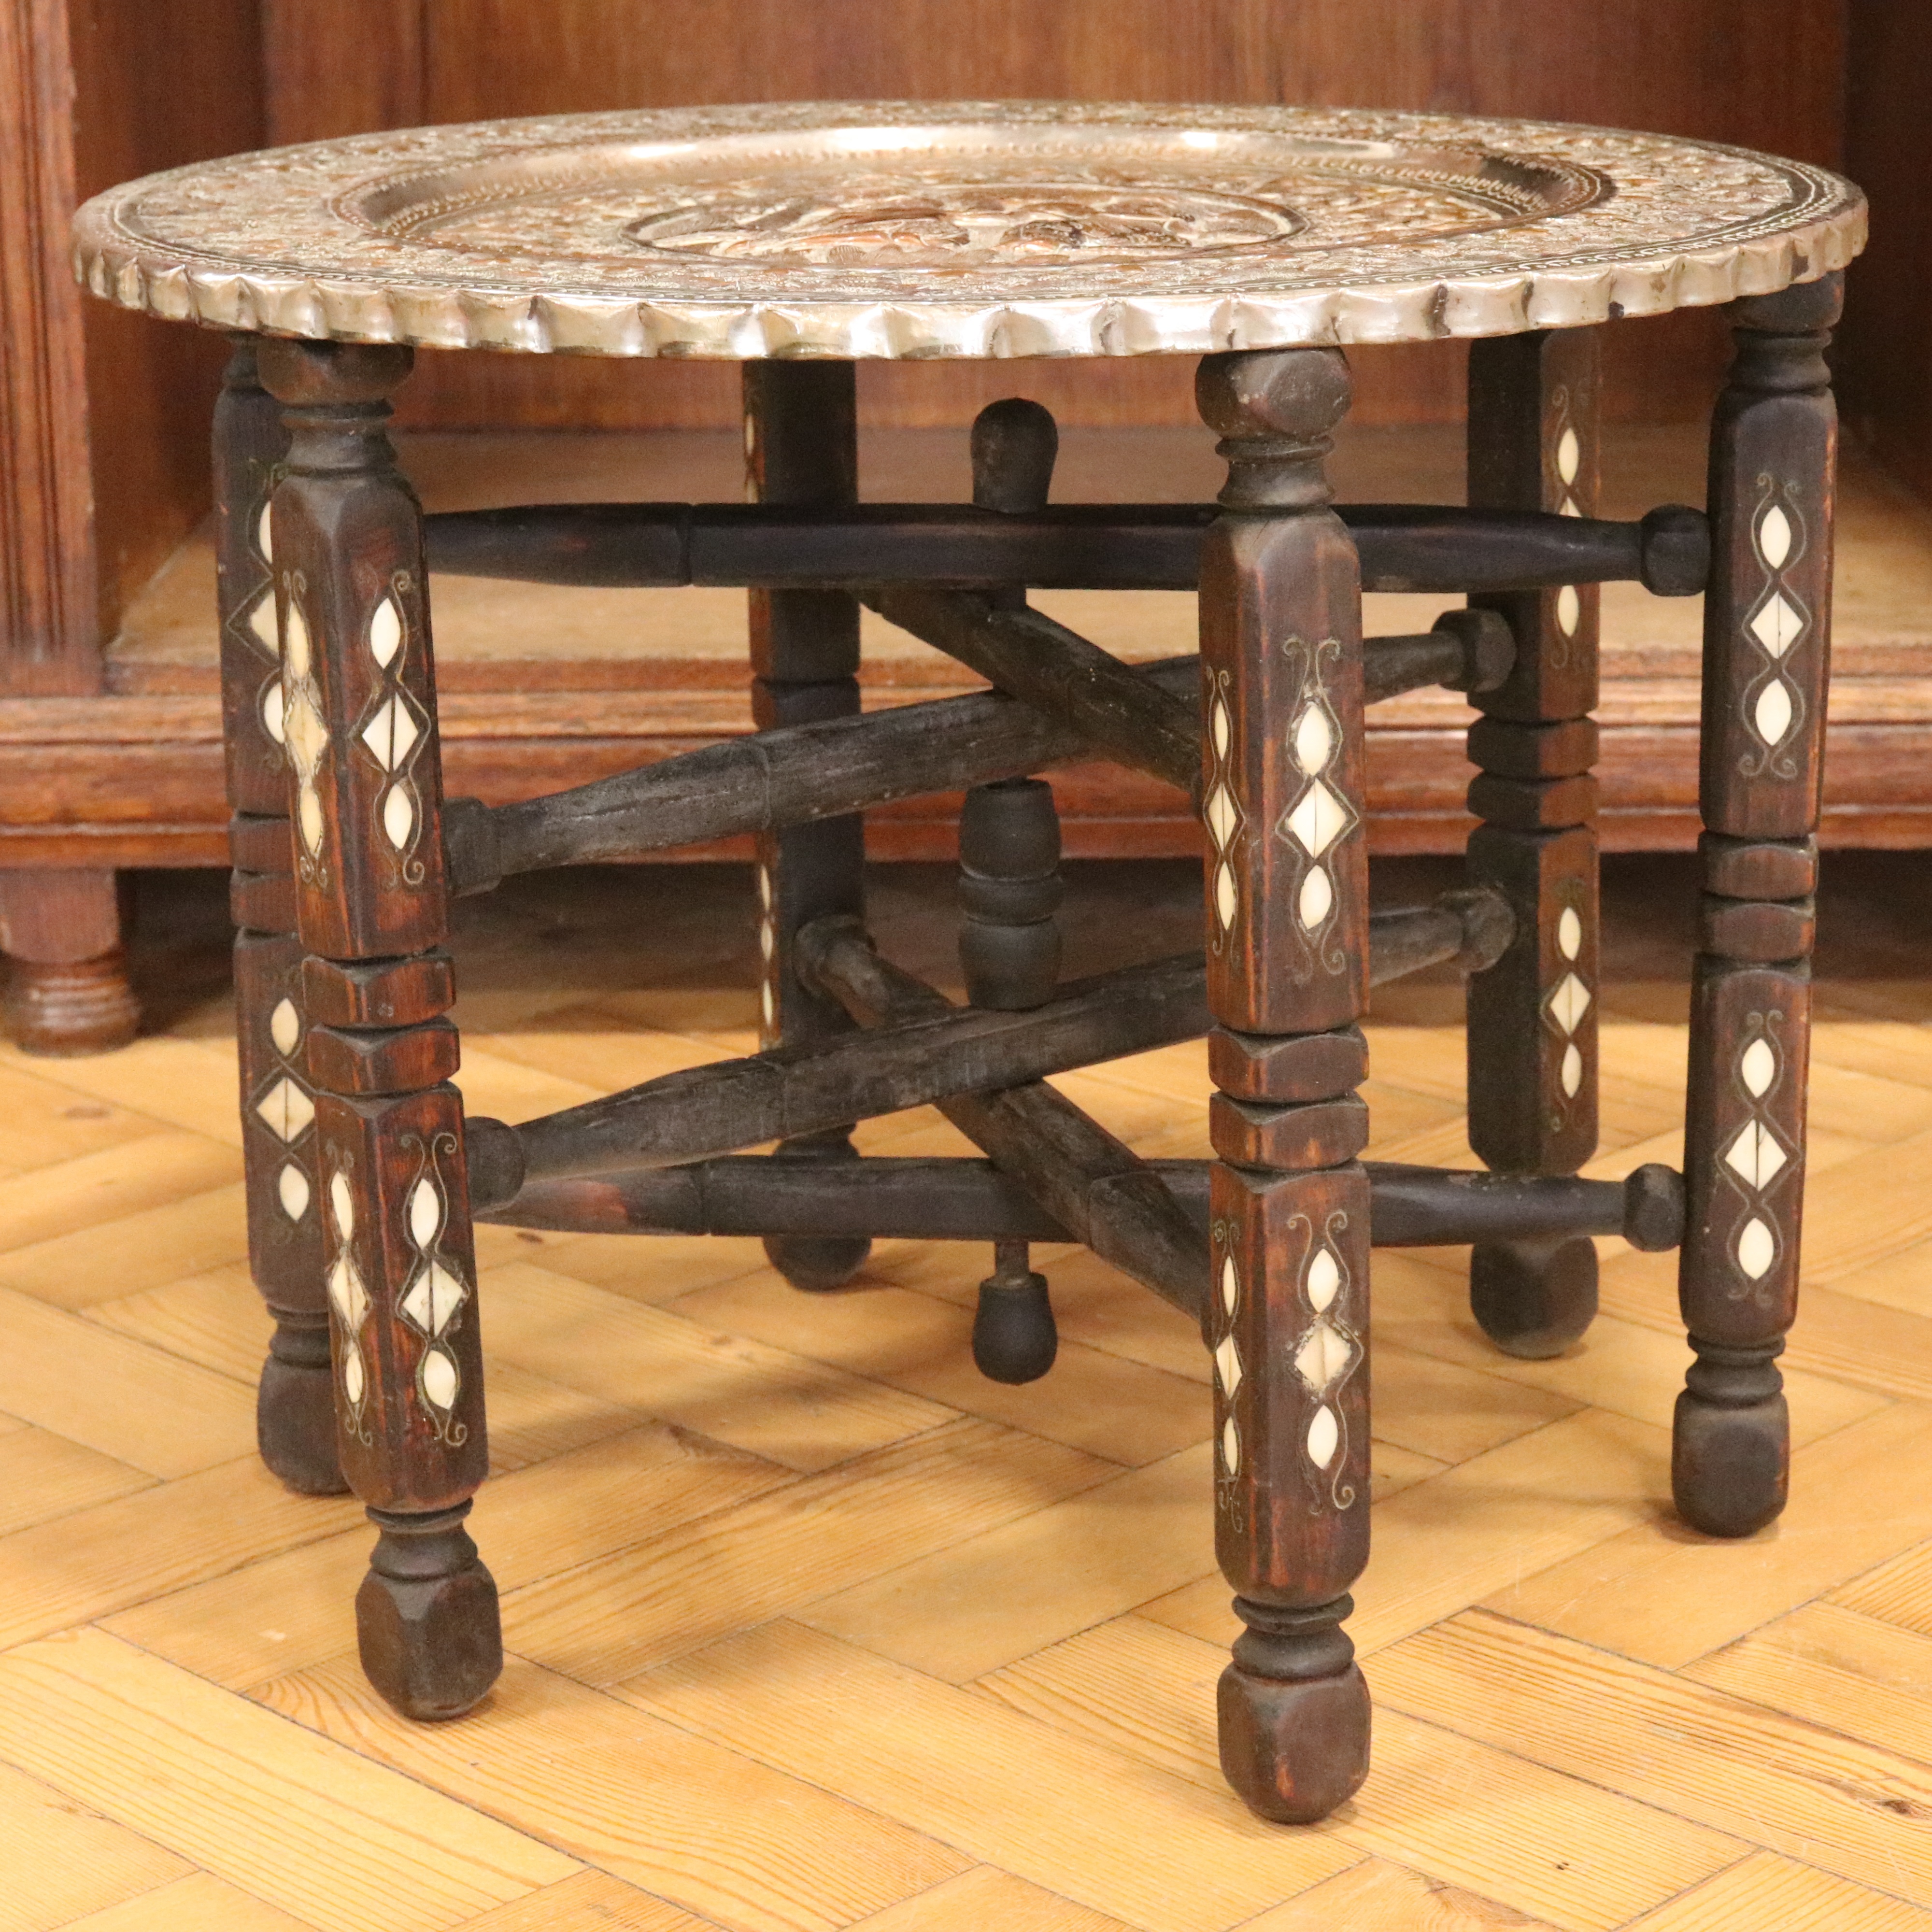 An early-to-mid 20th Century Persian copper-topped and mother-of-pearl inlaid folding table, 52 cm x - Image 2 of 4